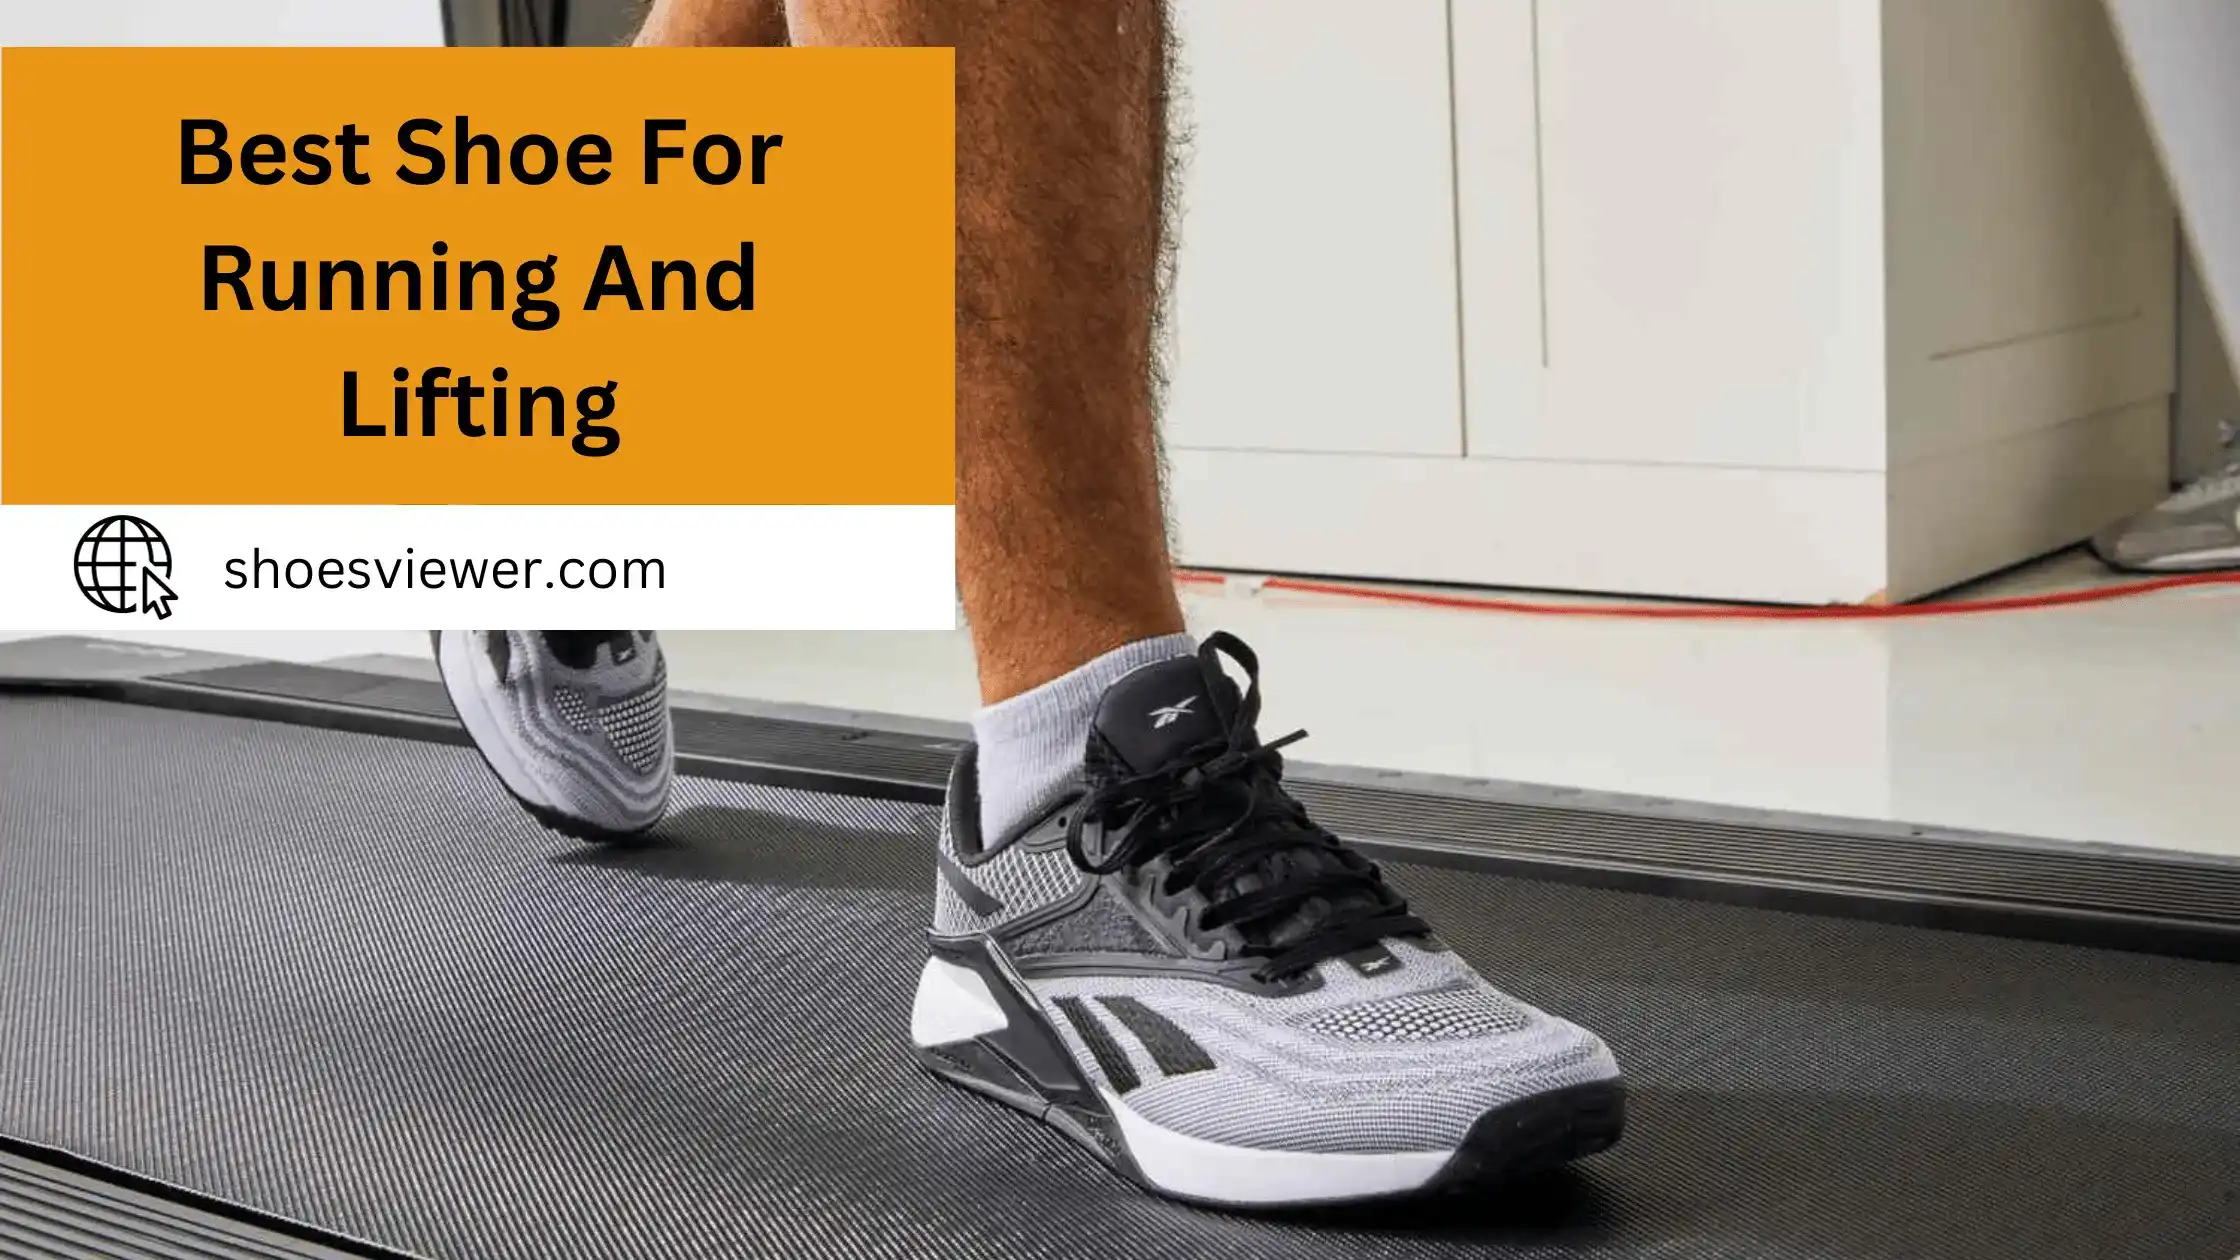 Best Shoe For Running And Lifting - (Complete Reviews)